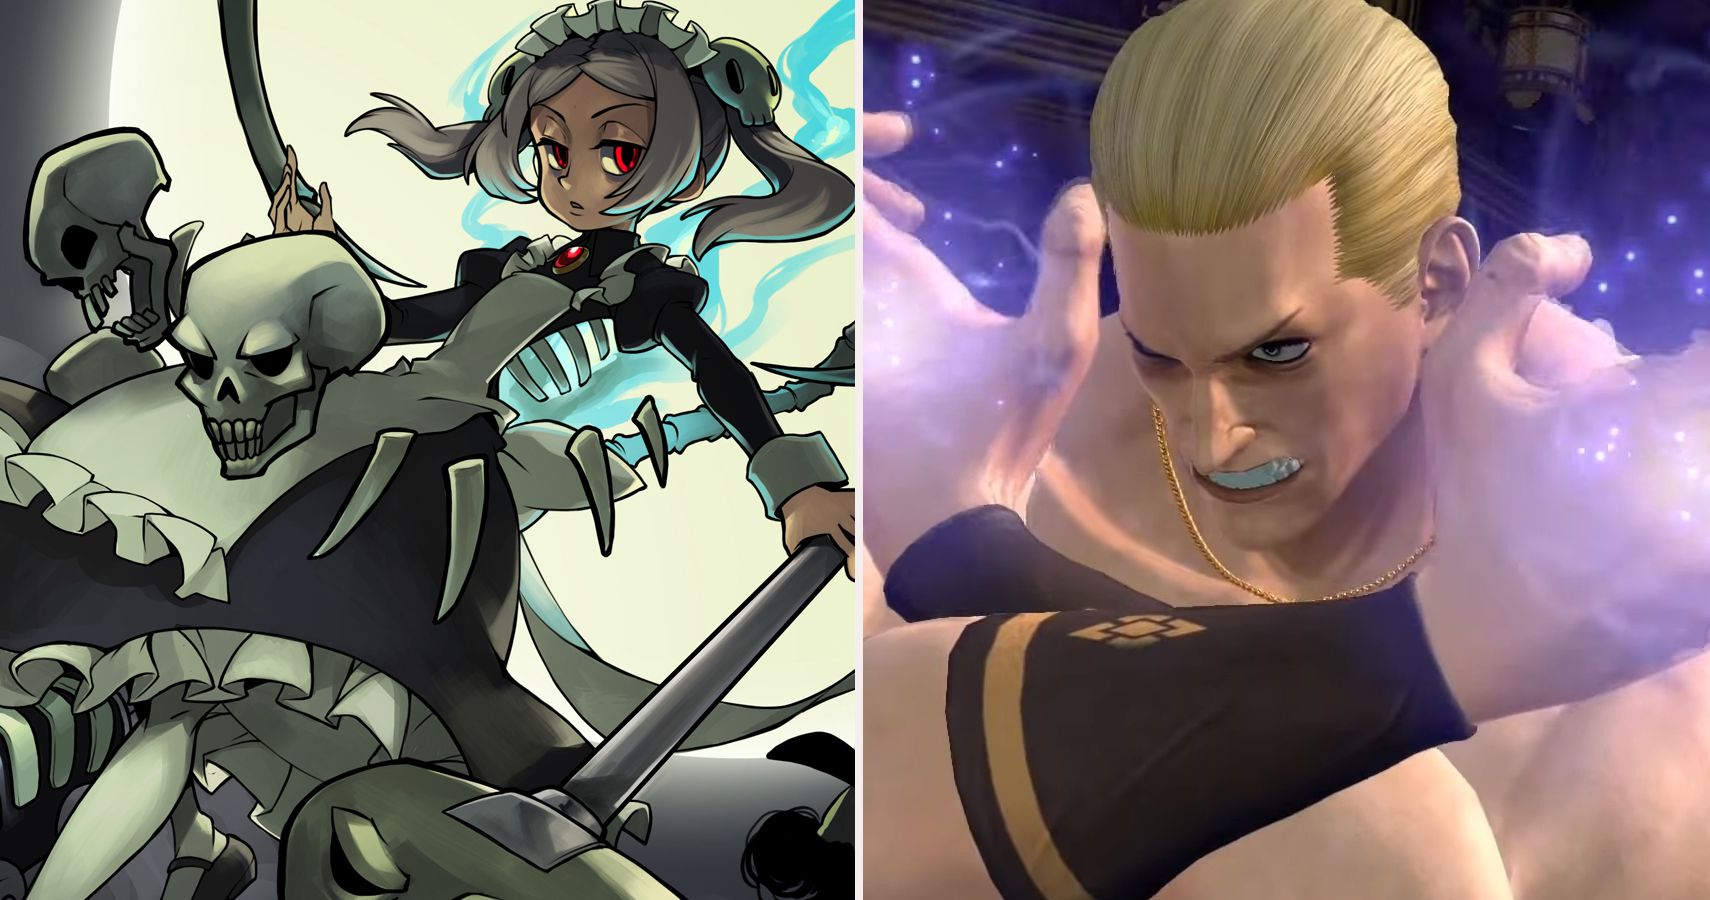 Top 10 Cheap Fighting Game Bosses That Will Make You Rage Quit